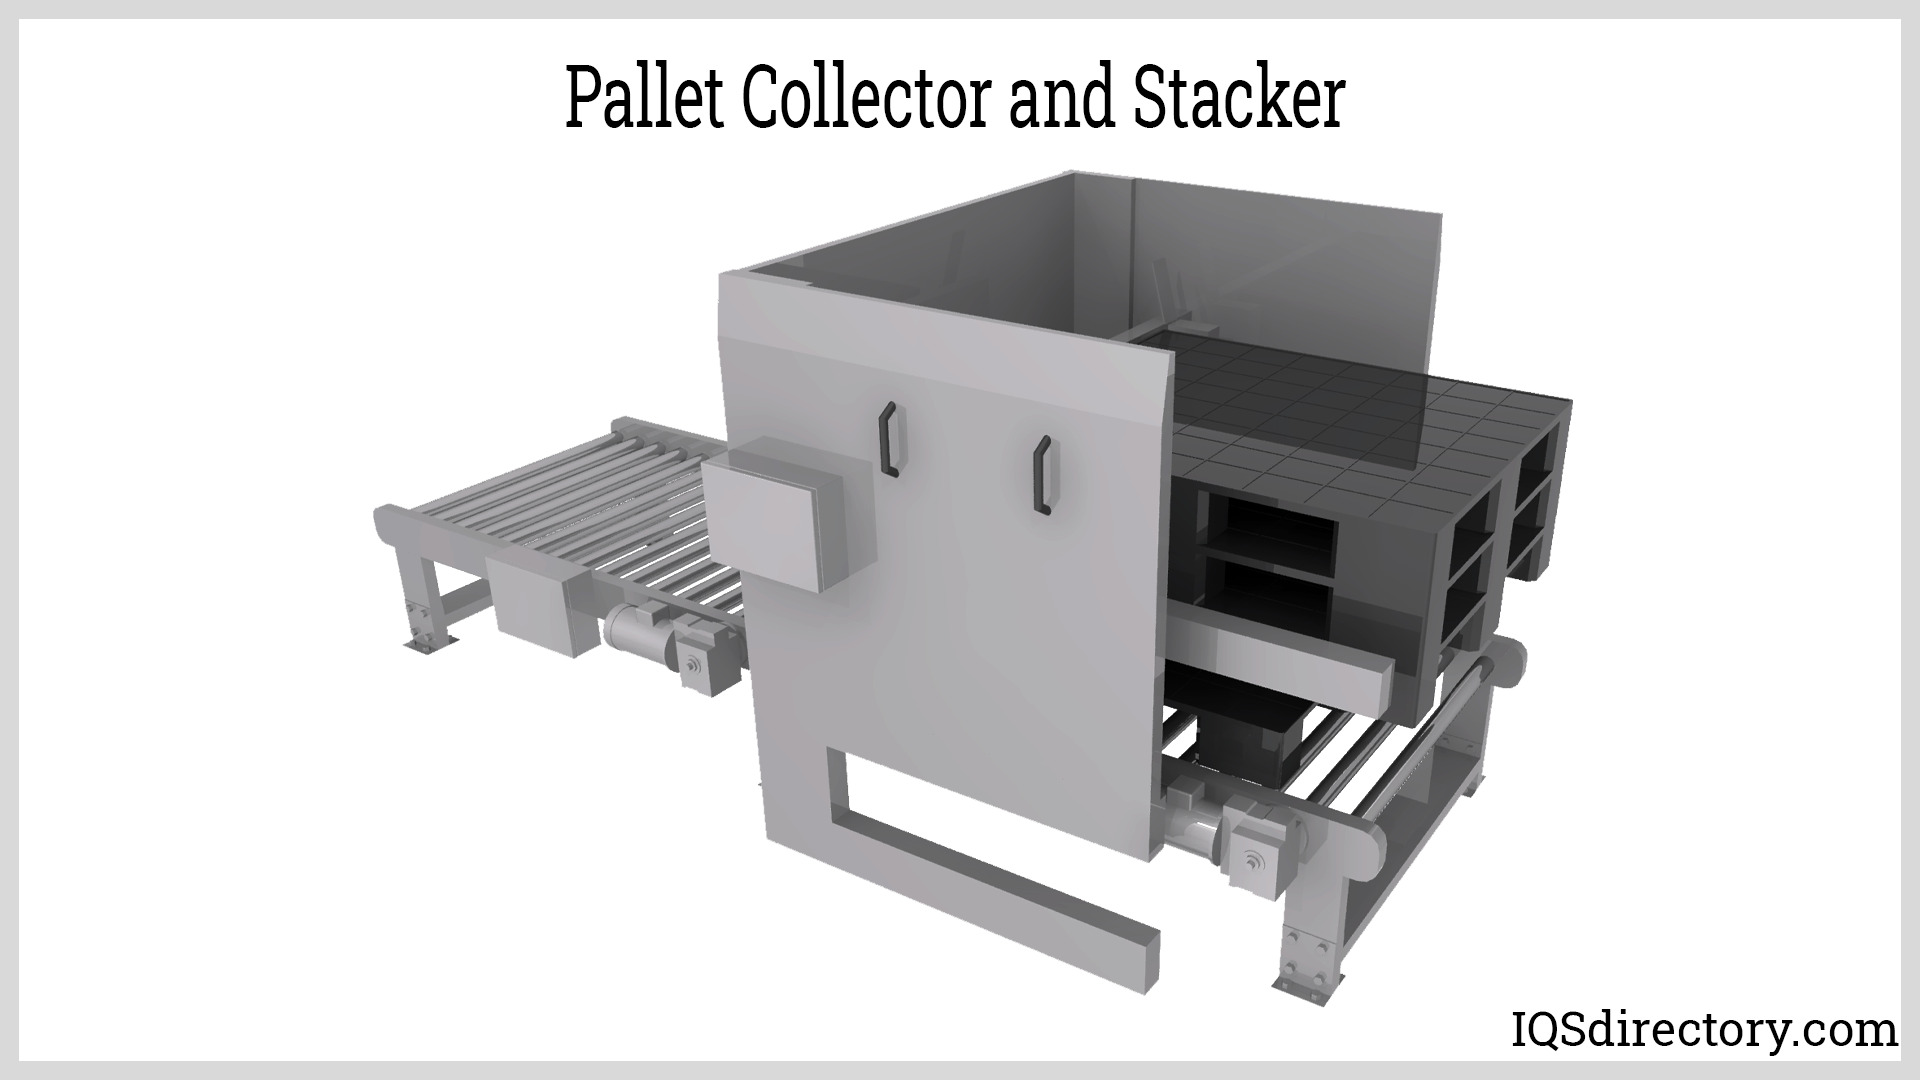 Pallet Collector and Stacker